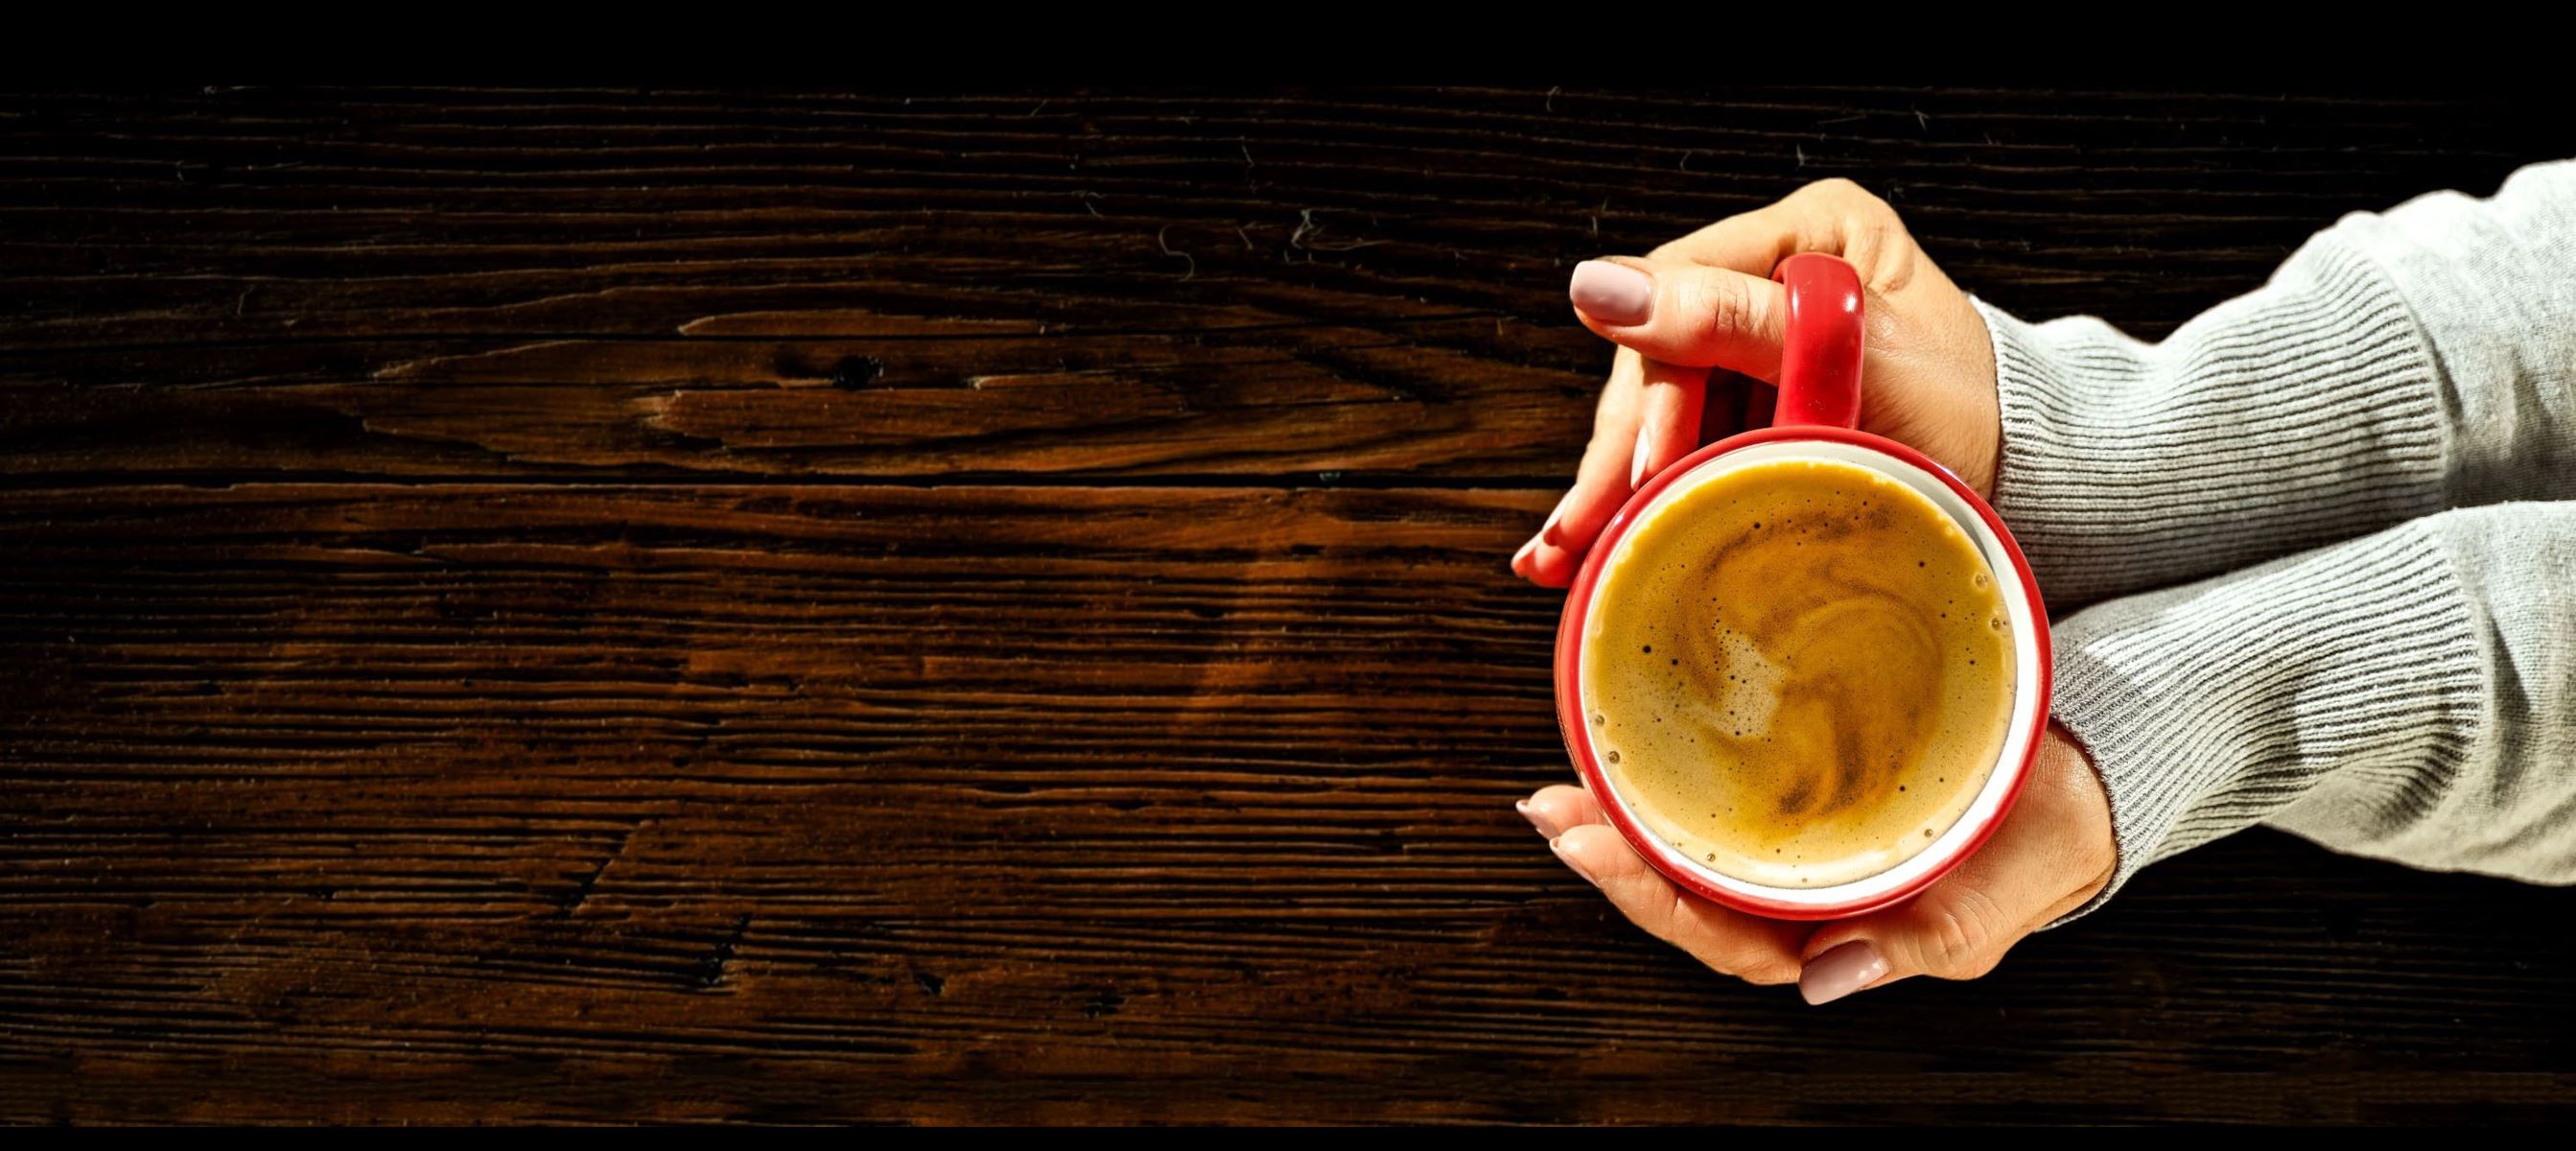 Woman's hands holding a coffee cup on a wooden surface